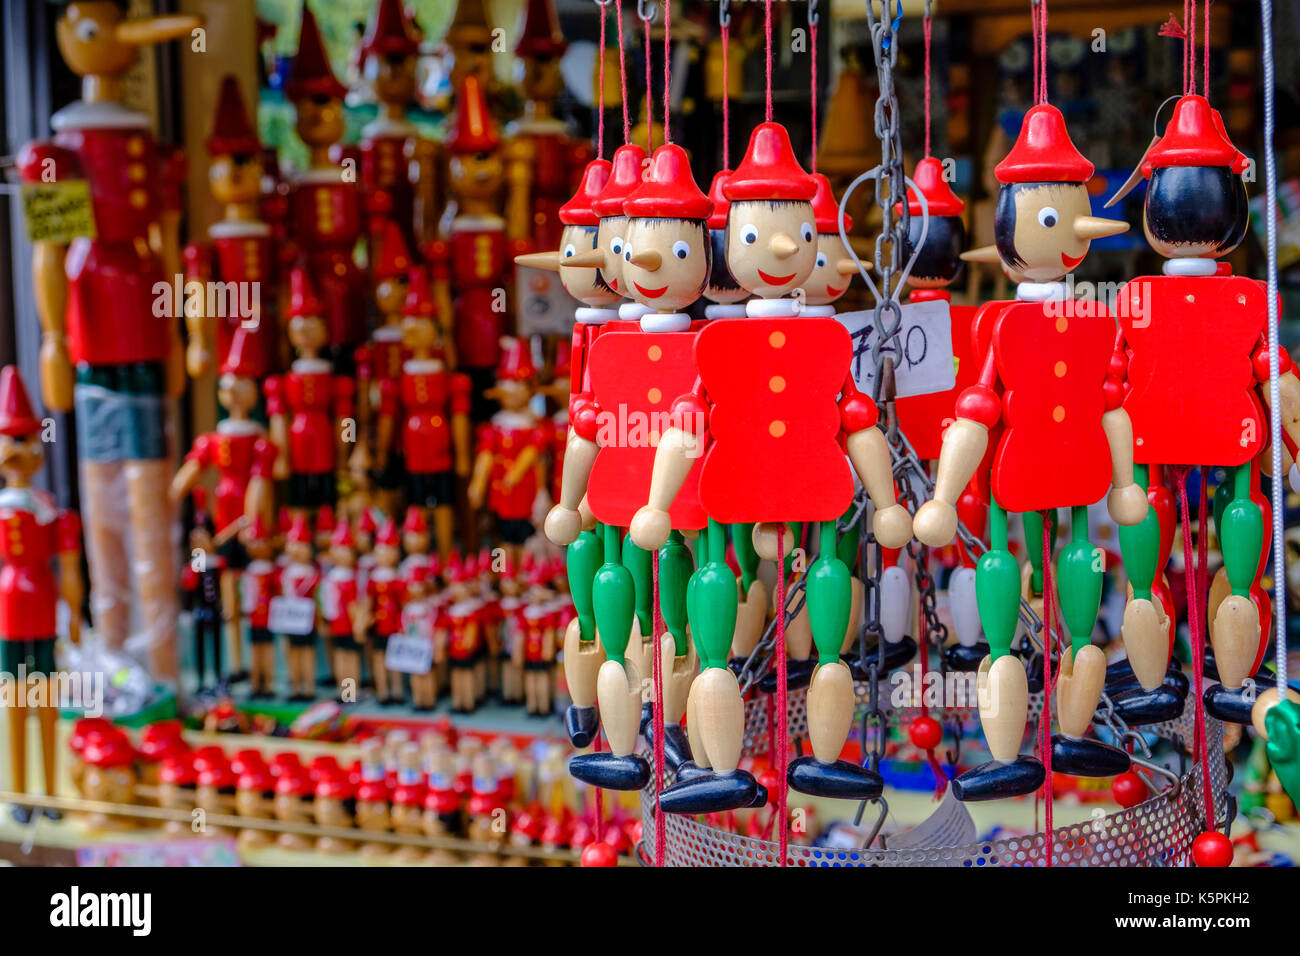 Small colorful woodcarved statues of Pinocchio are for sale as souvenirs Stock Photo